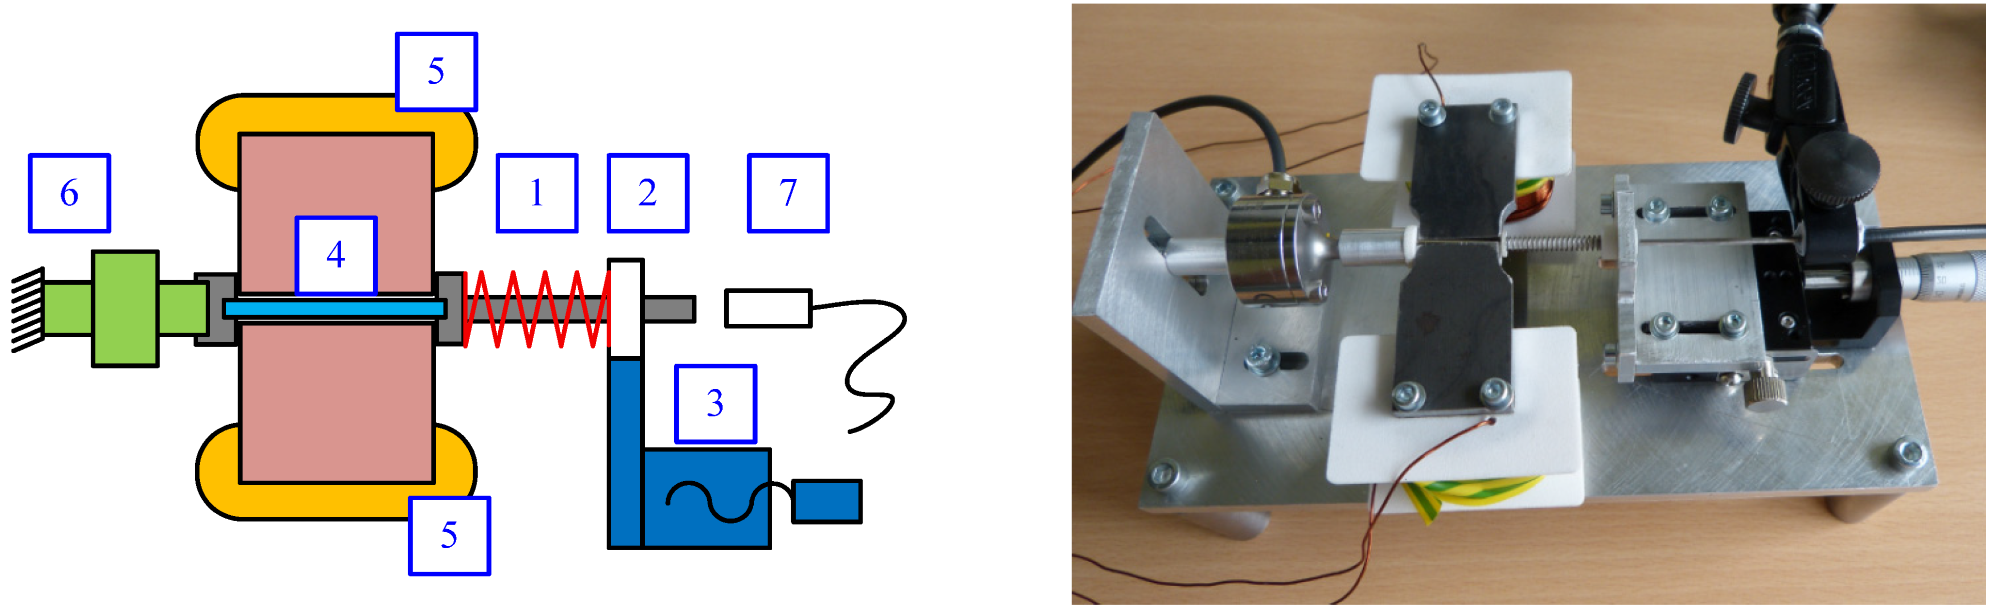 Design of the MSMA actuator used for preliminary studies: 1—coil spring, 2—PTFE sleeve, 3—table, 4—air gap with MSMA, 5—coils, 6—force transducer, 7—displacement transducer.